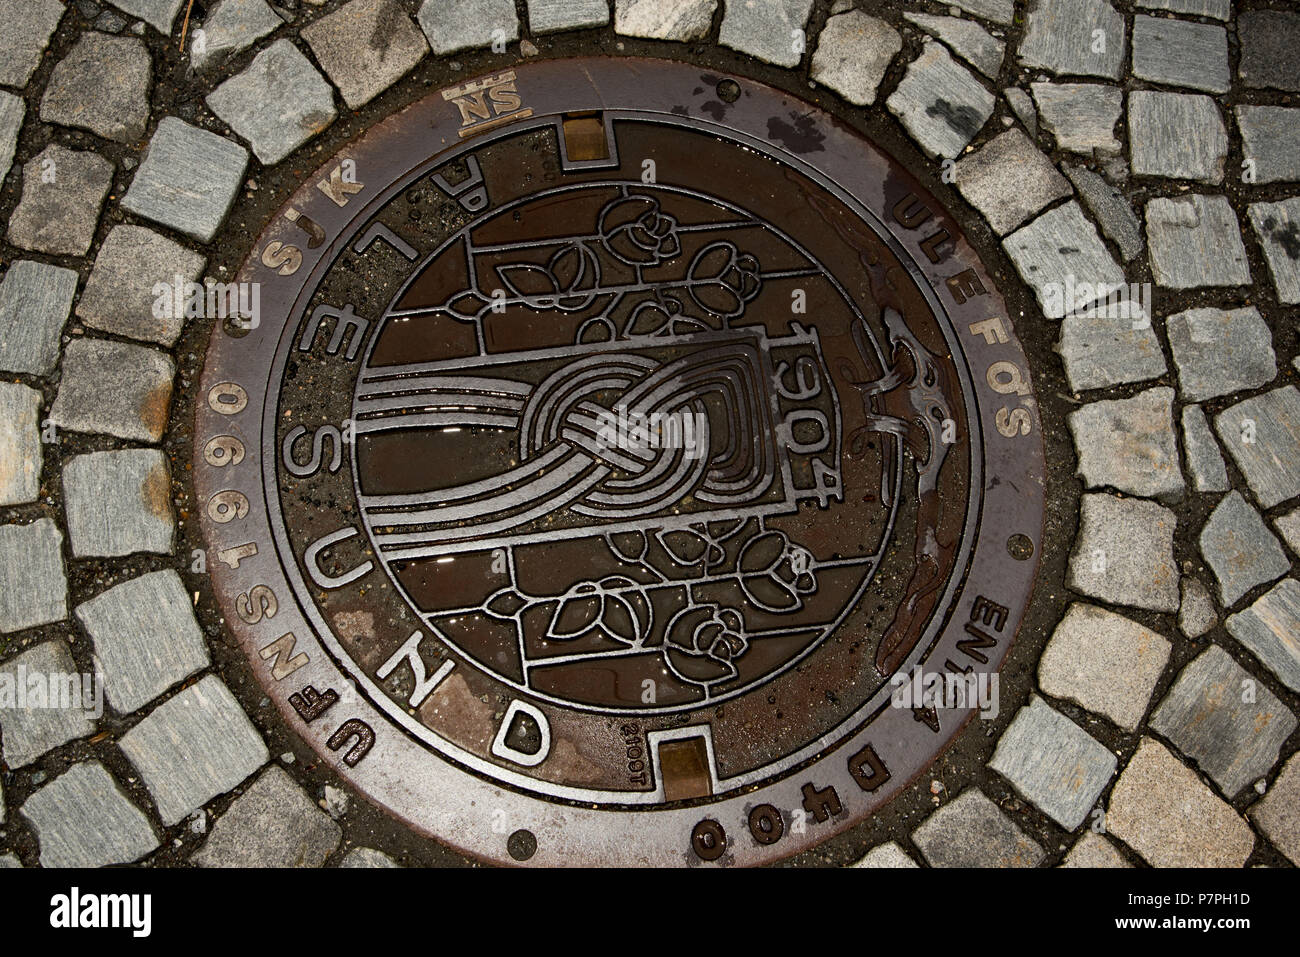 Roses and tower shown on manhole cover in Ålesund. Stock Photo